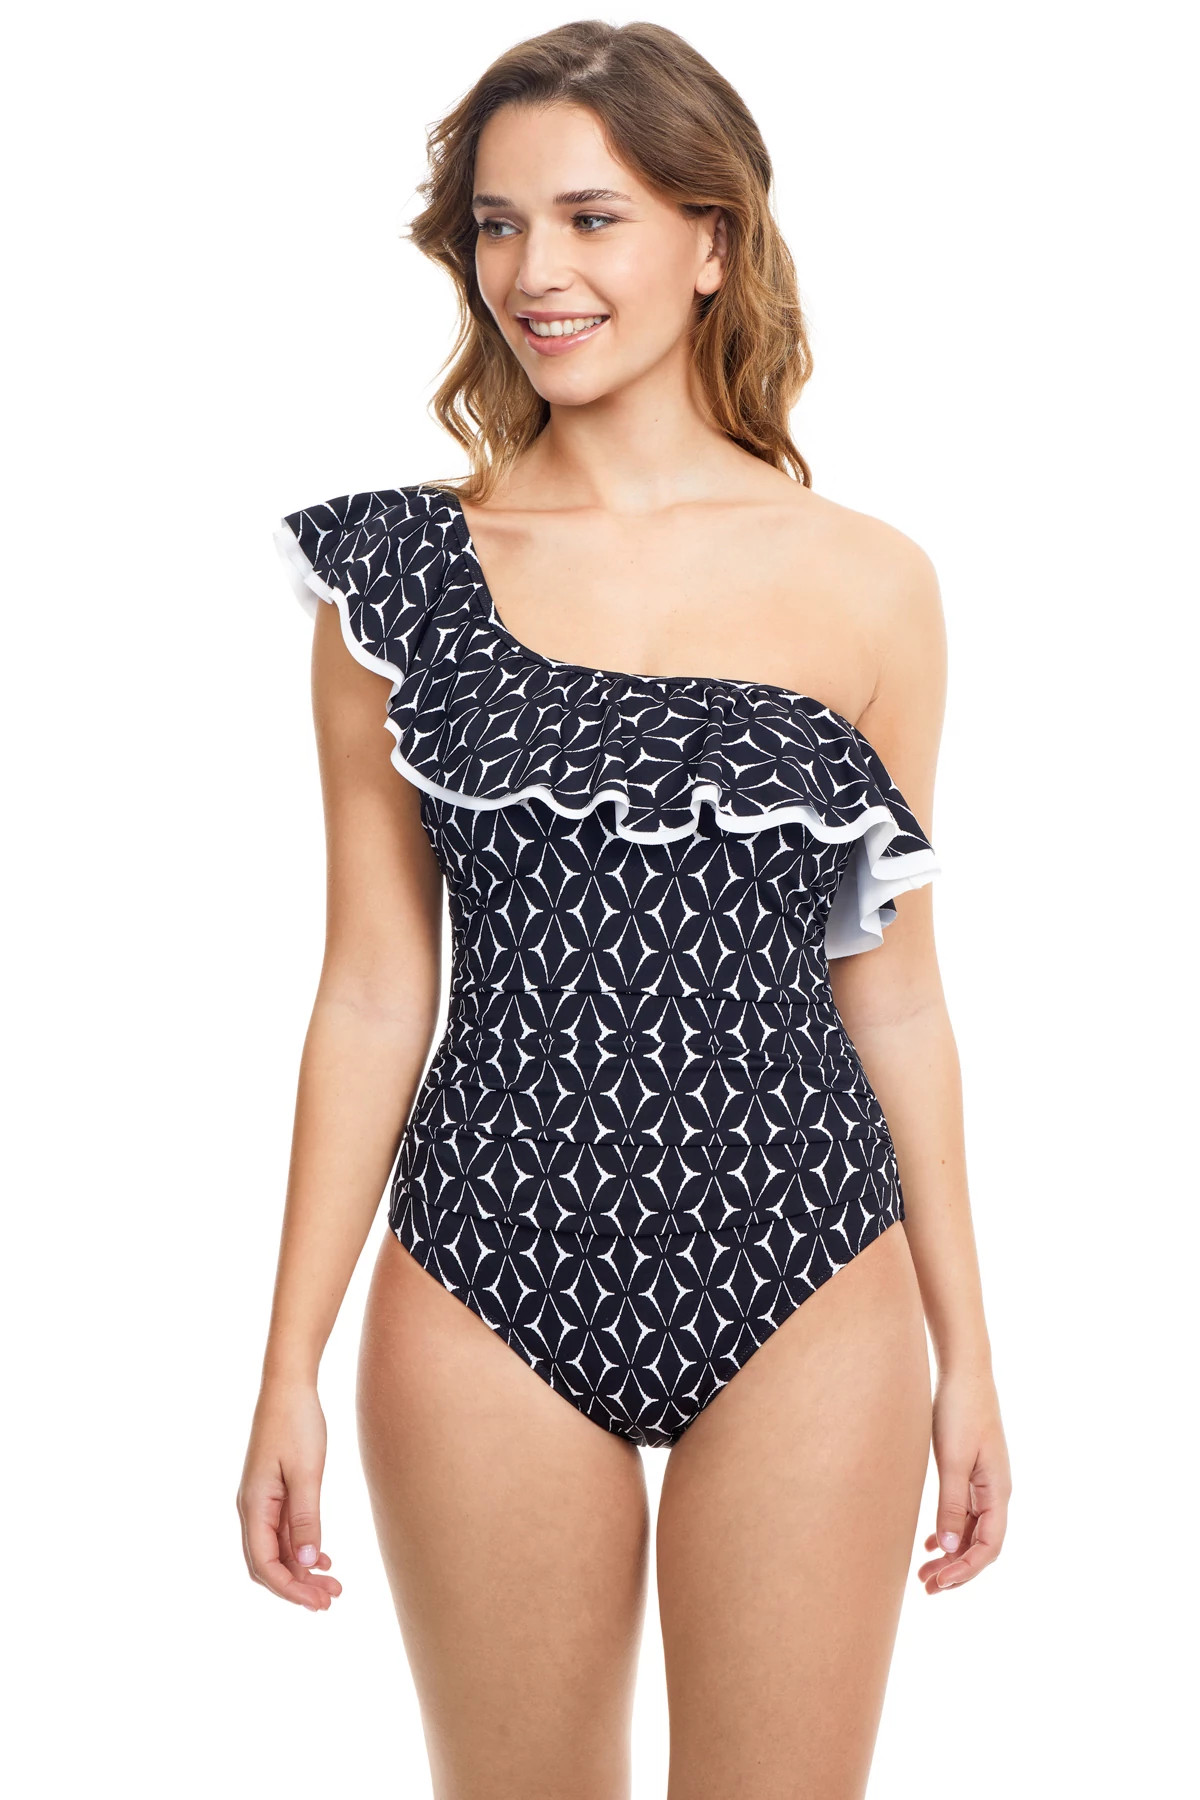 NAVY/WH Ruffle Asymmetrical One Piece Swimsuit image number 1